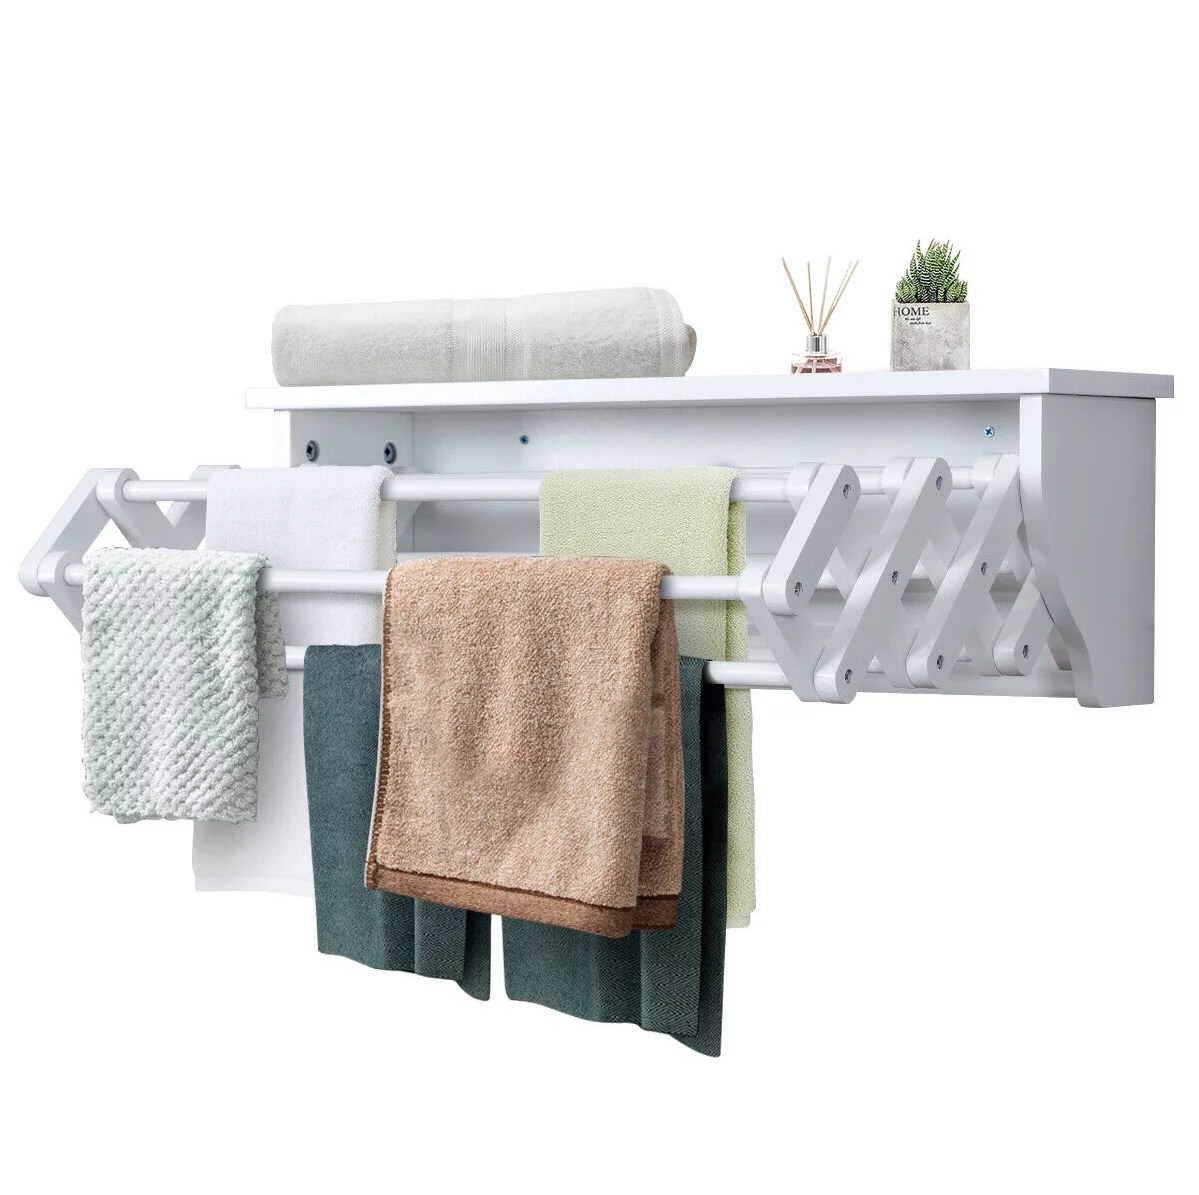 WallMounted Drying Rack Folding Clothes Towel Laundry Room Storage